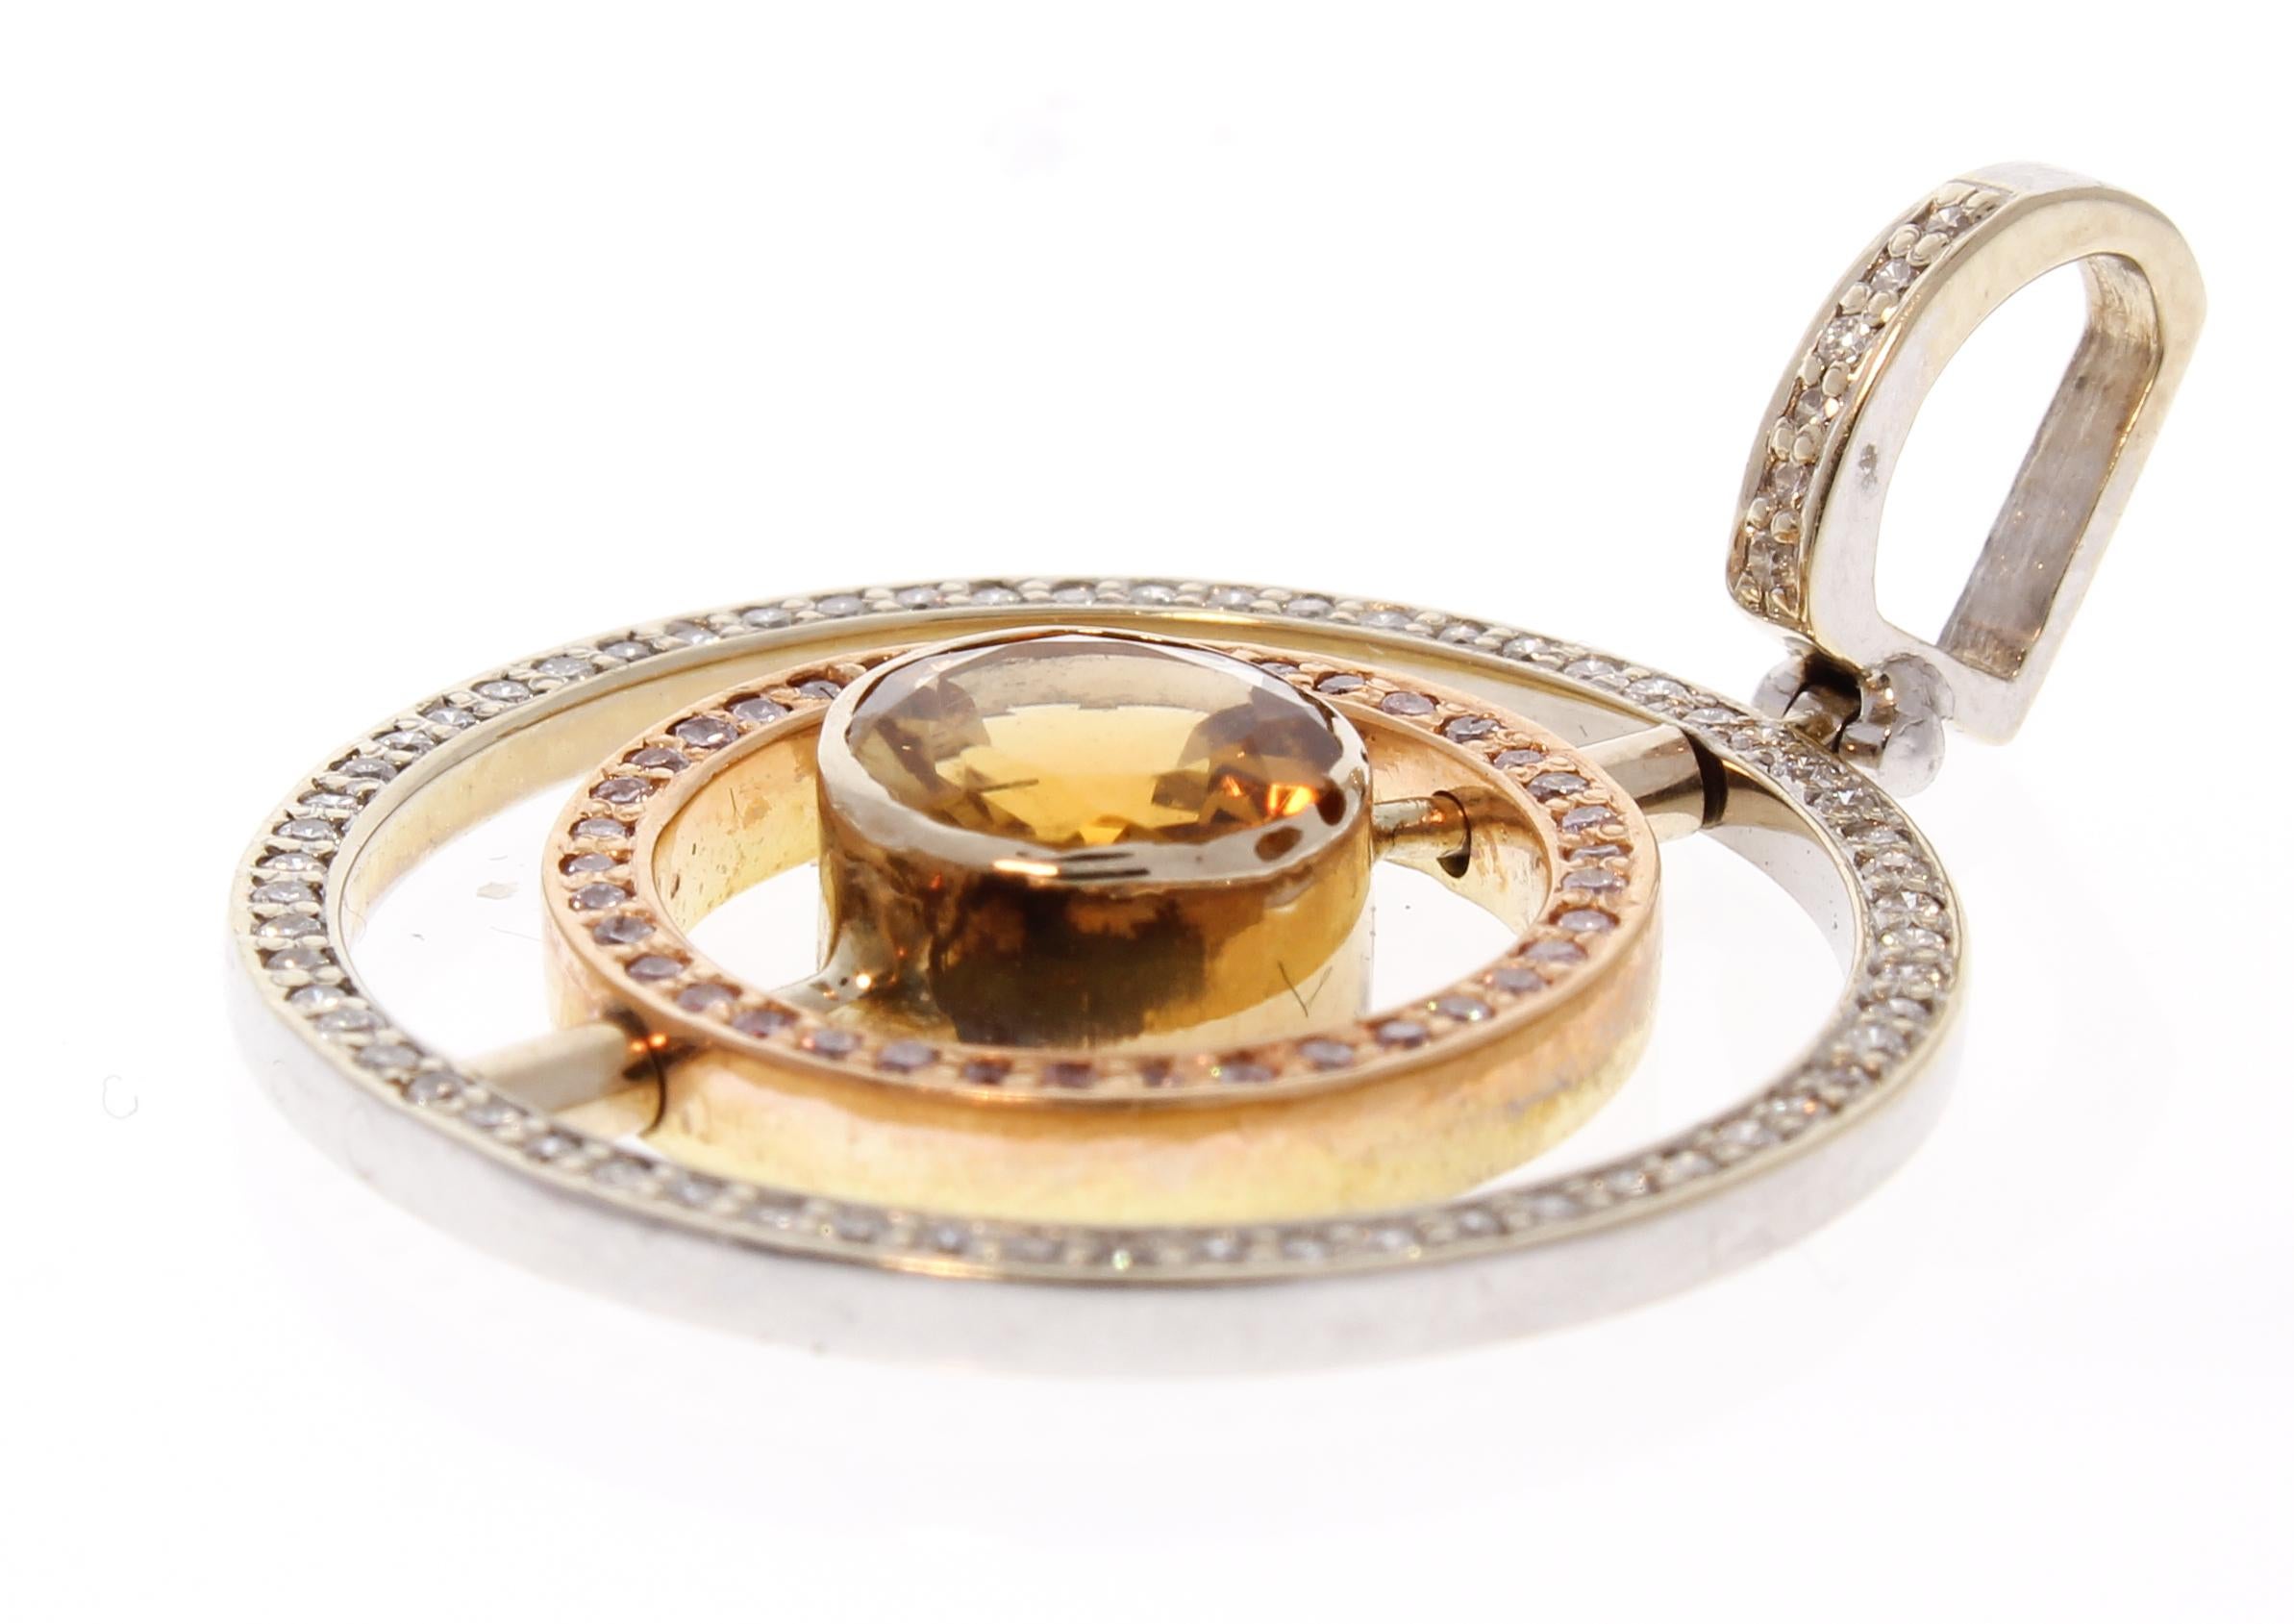 Extraordinary and versatile! That’s exactly what you'll say when you feast your eyes on this gorgeous contemporary pendant. The round citrine garnet is from Brazil. Two diamond frames featuring an the inner spinning halo to show natural pink